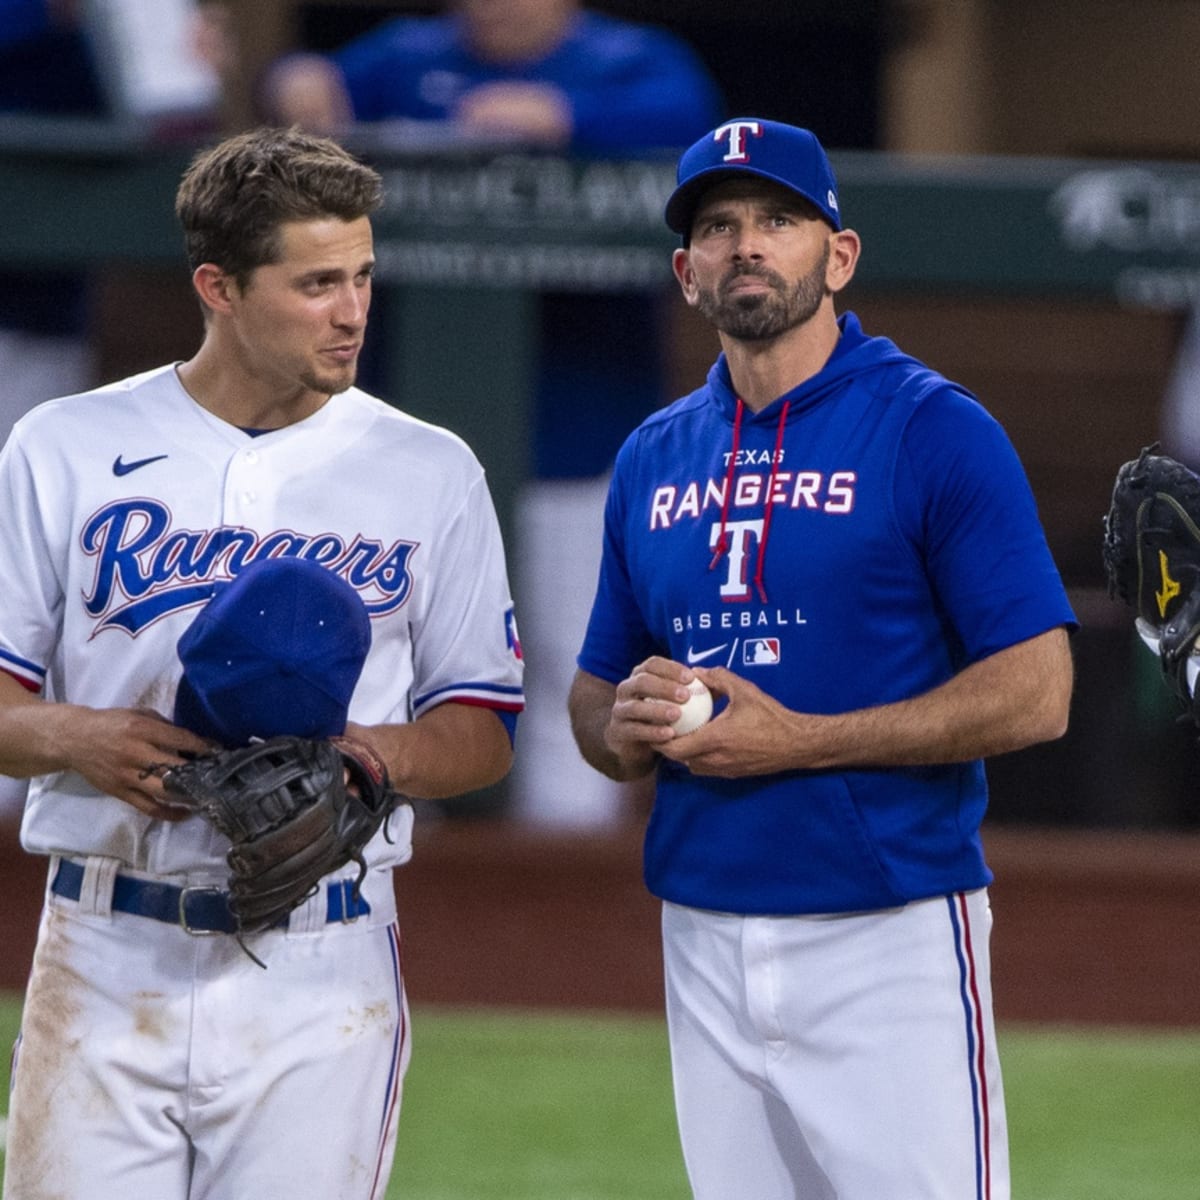 Why did the Rangers fire Chris Woodward? Failure to follow boston